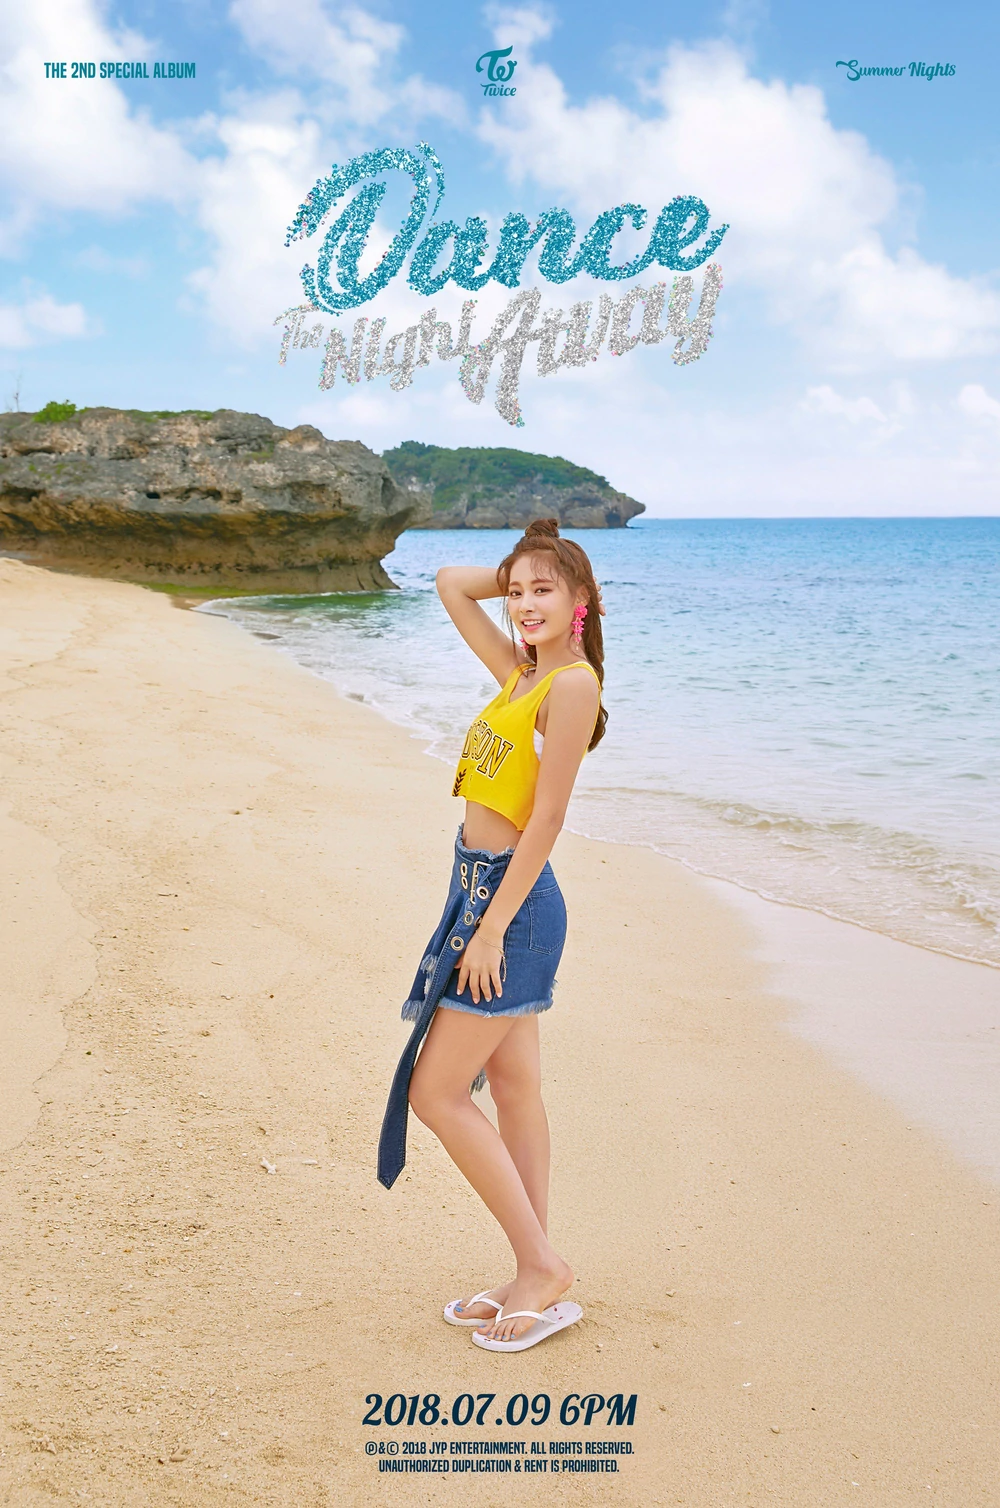 Twice Summer Nights Tzuyu Concept Teaser Picture Image Photo Kpop K-Concept 4